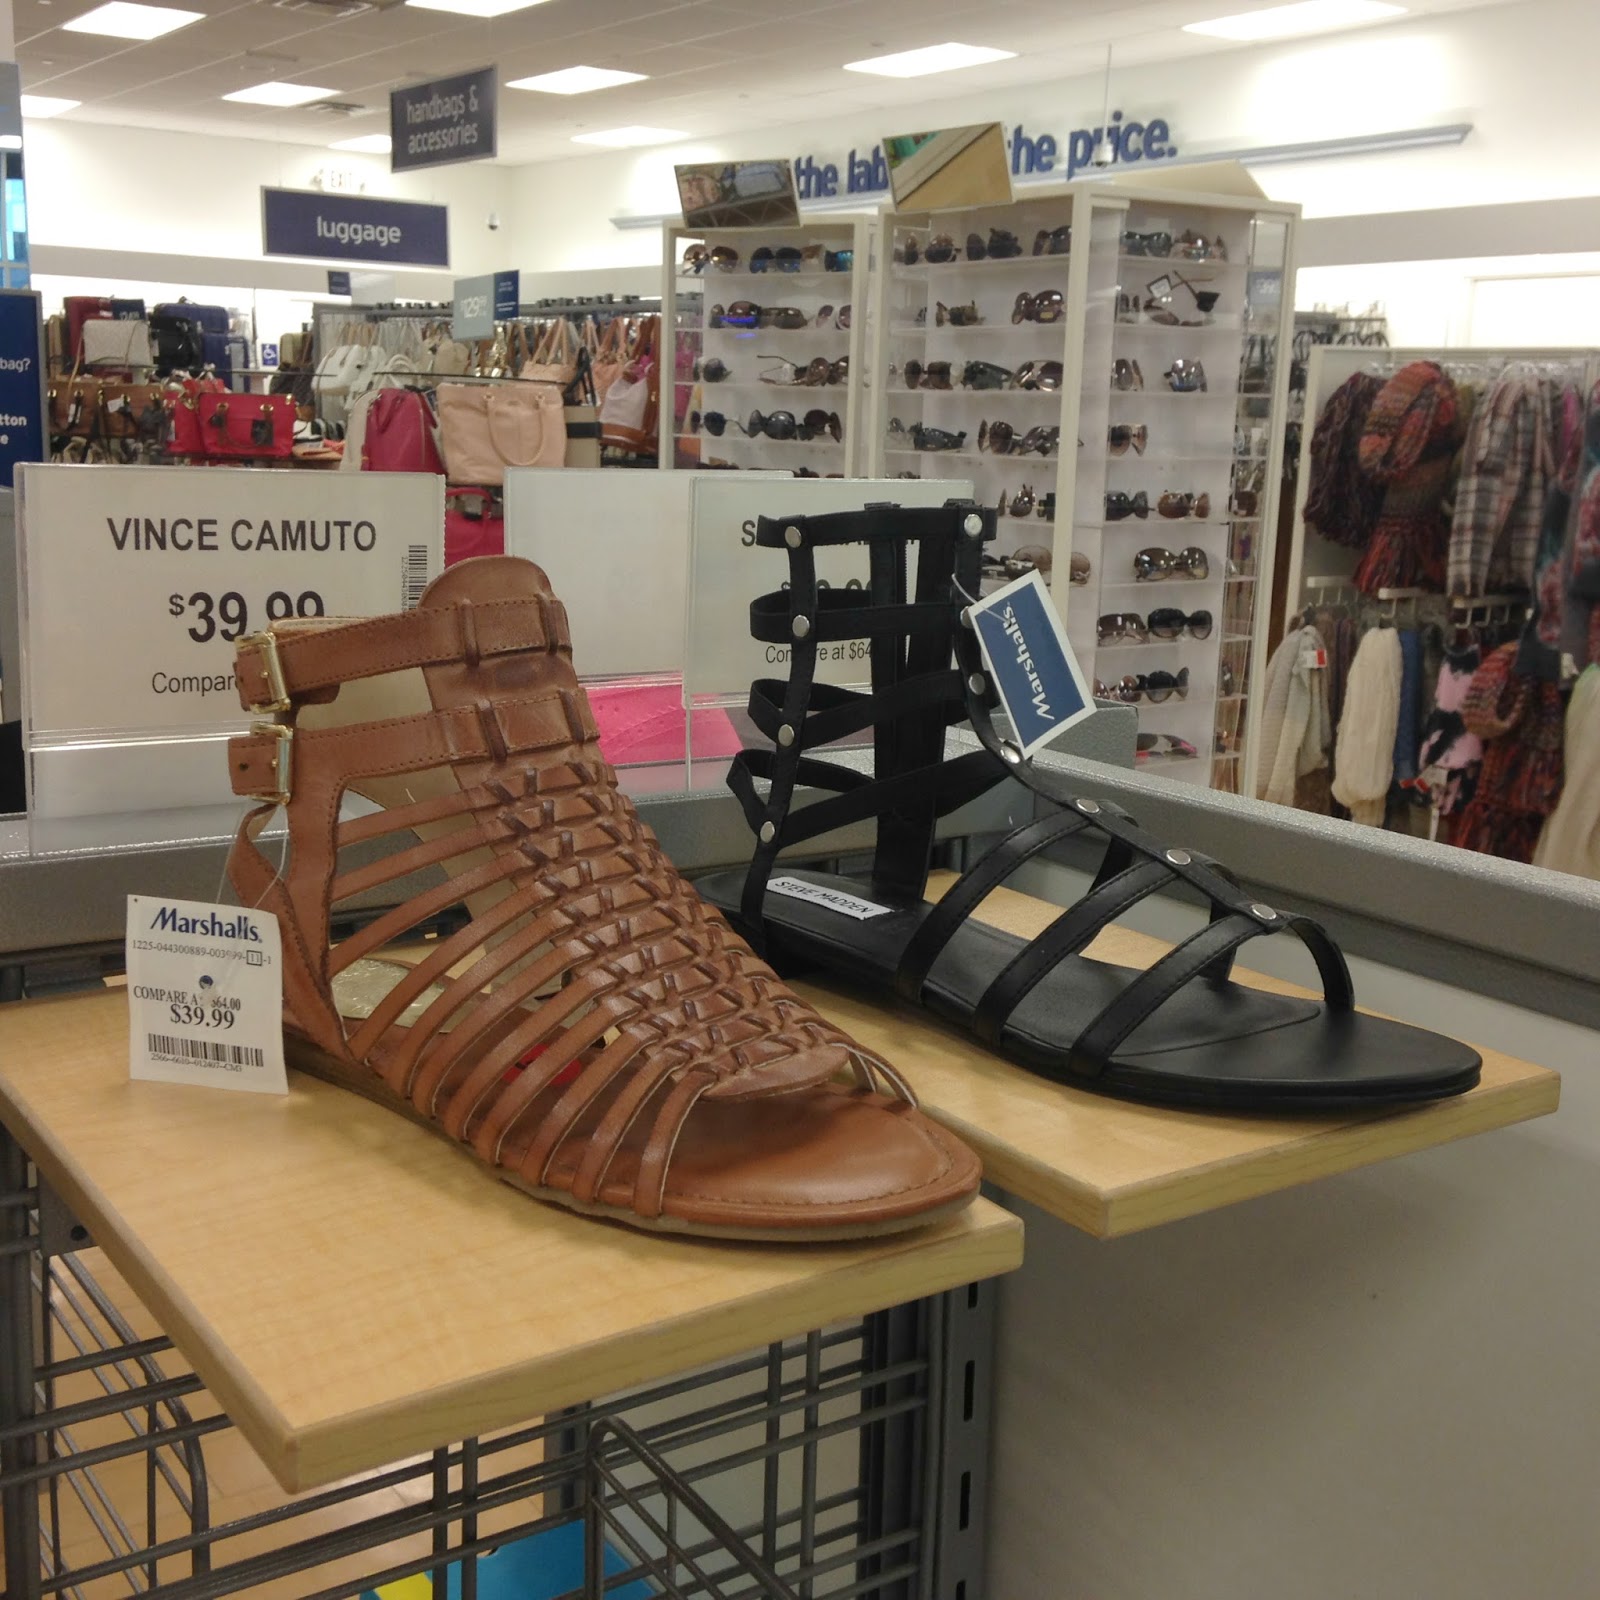 Handbags At Marshalls Store | Confederated Tribes of the Umatilla Indian Reservation